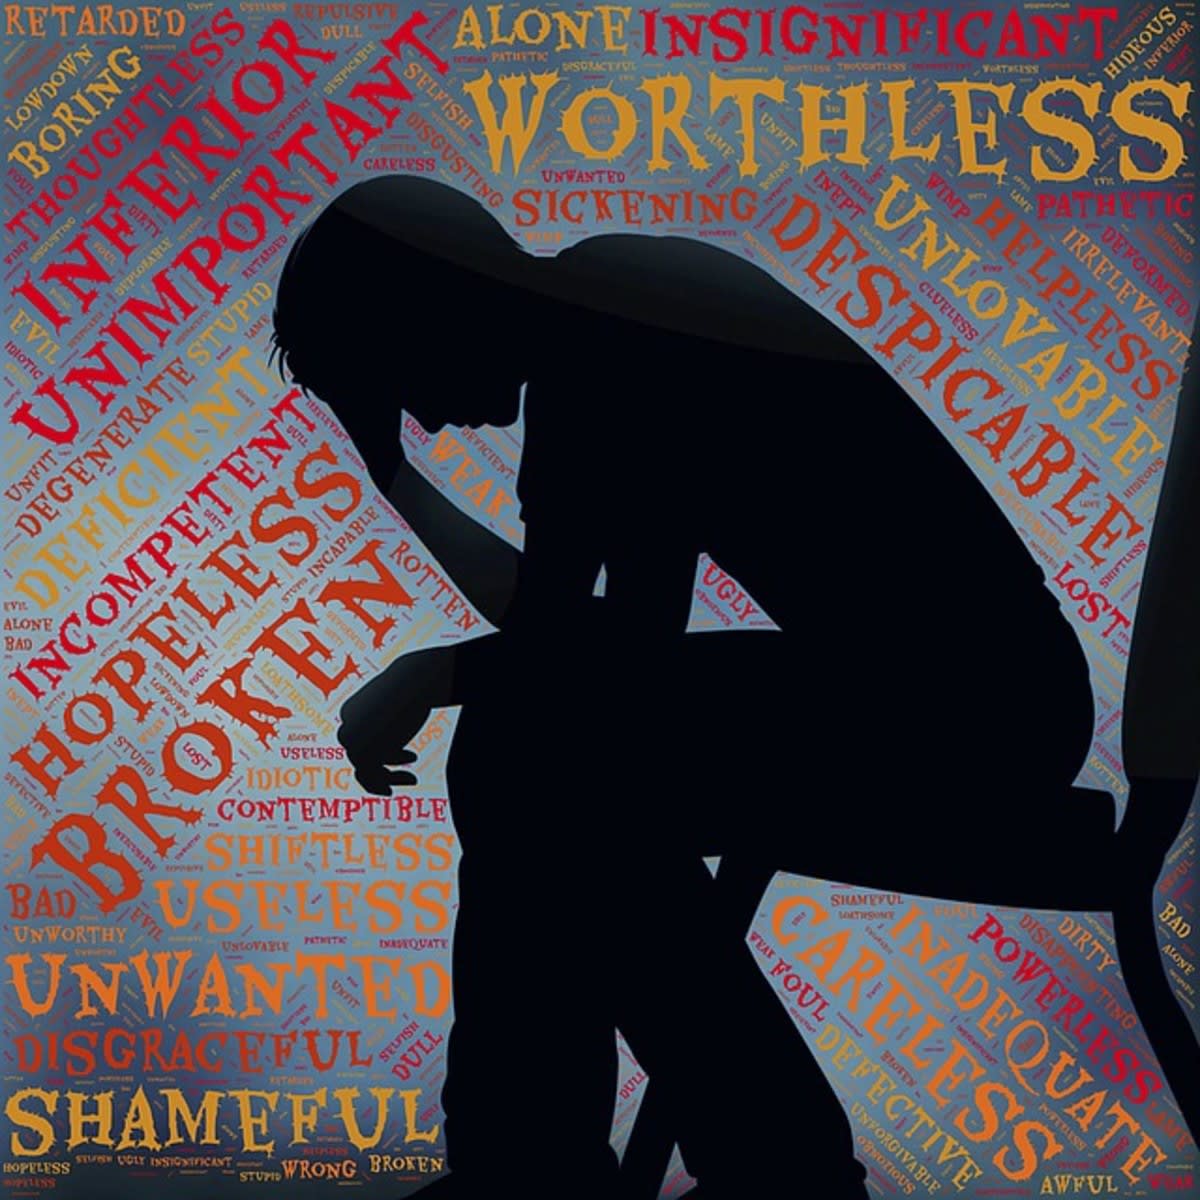 55 Bible Verses About Worry: God's Word to Overcome Worrying